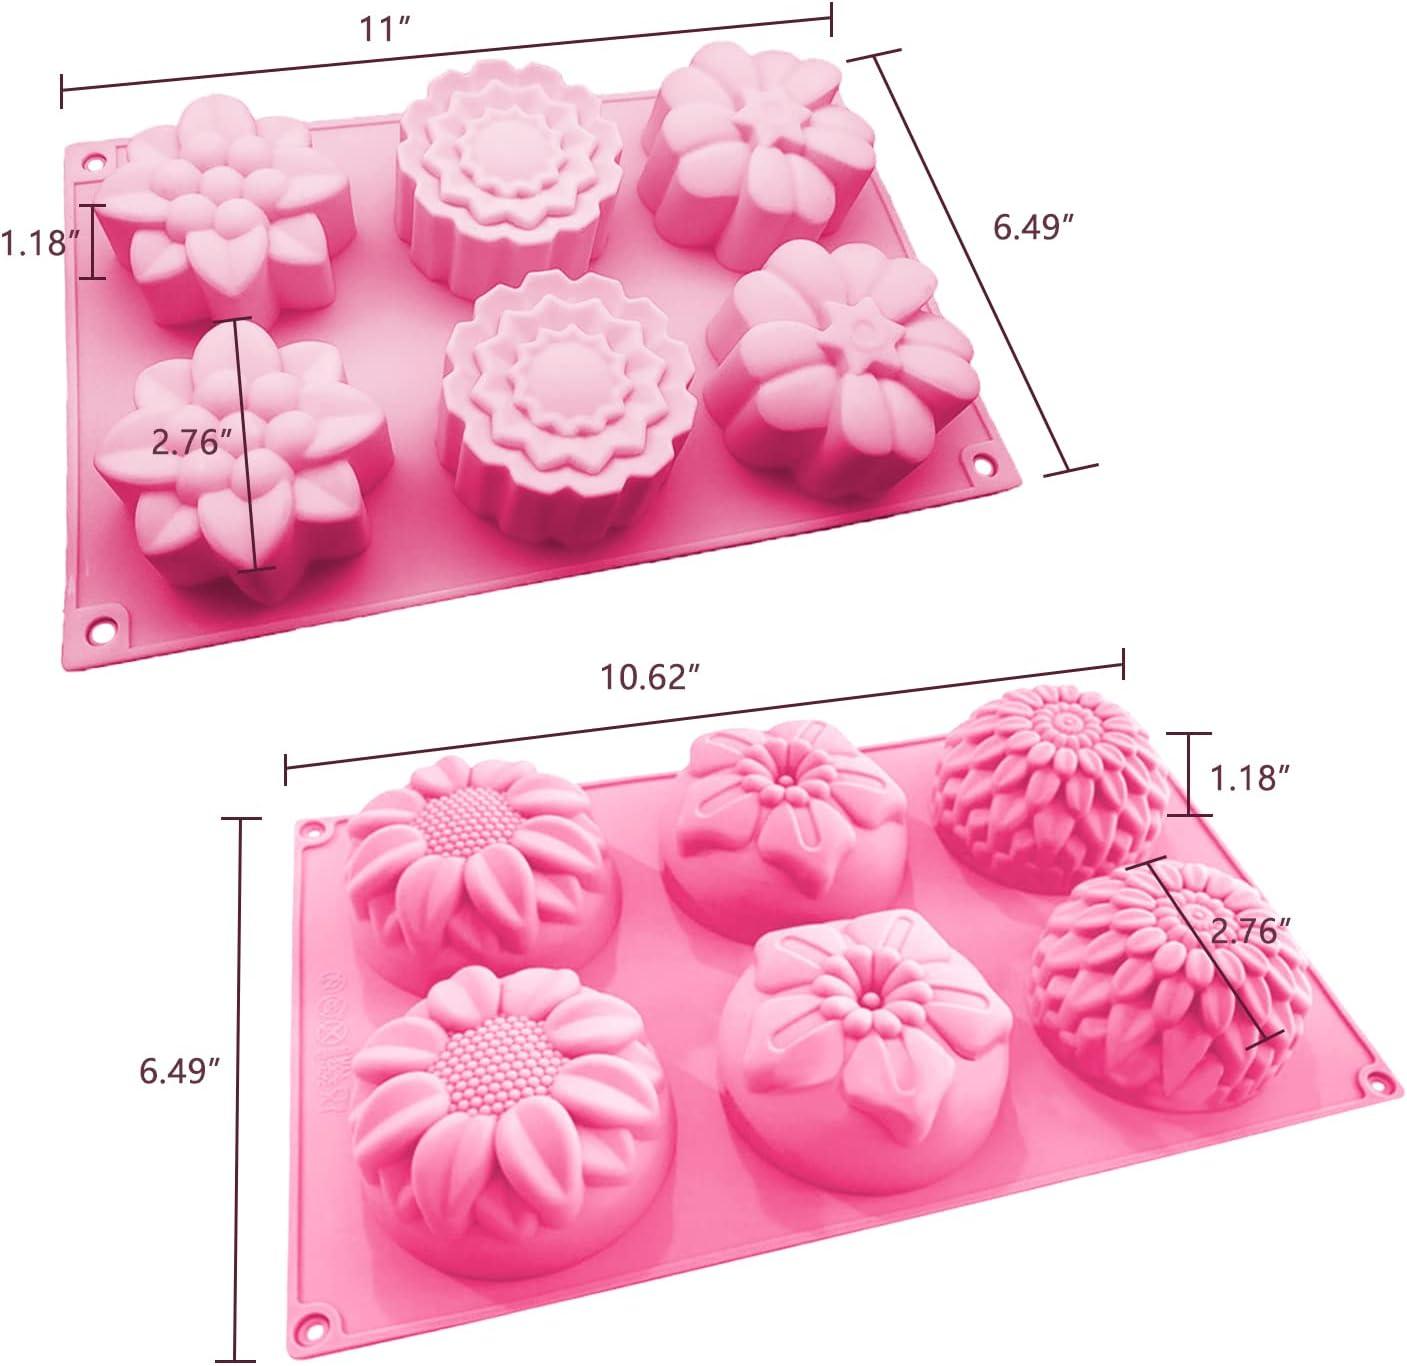  OBSGUMU 3 Pack Silicone Soap Molds, 6 Cavities Flower Making  Mold, Included Rectangle Shape Supplies, Perfect for Handmade Soaps,  Homemade Chocolate